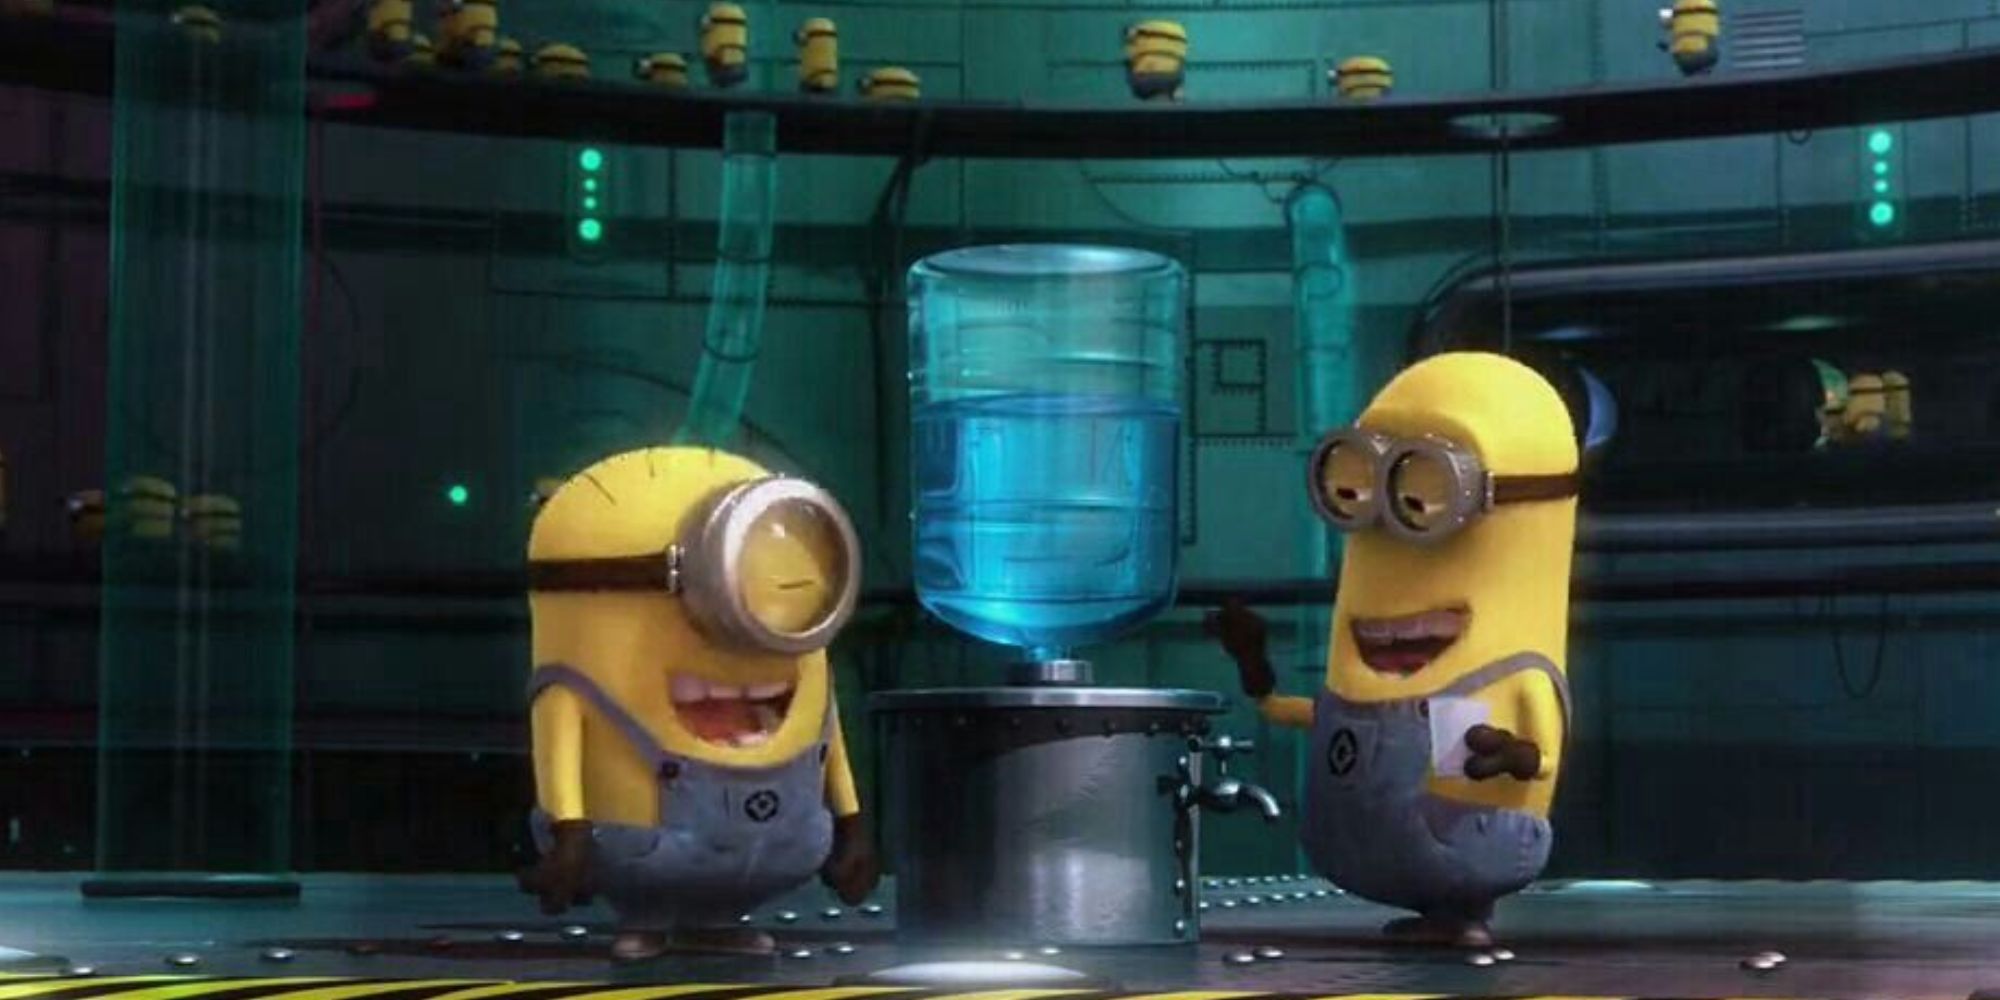 Two minions hang out by a water cooler and giggle at the bubbling noises it makes